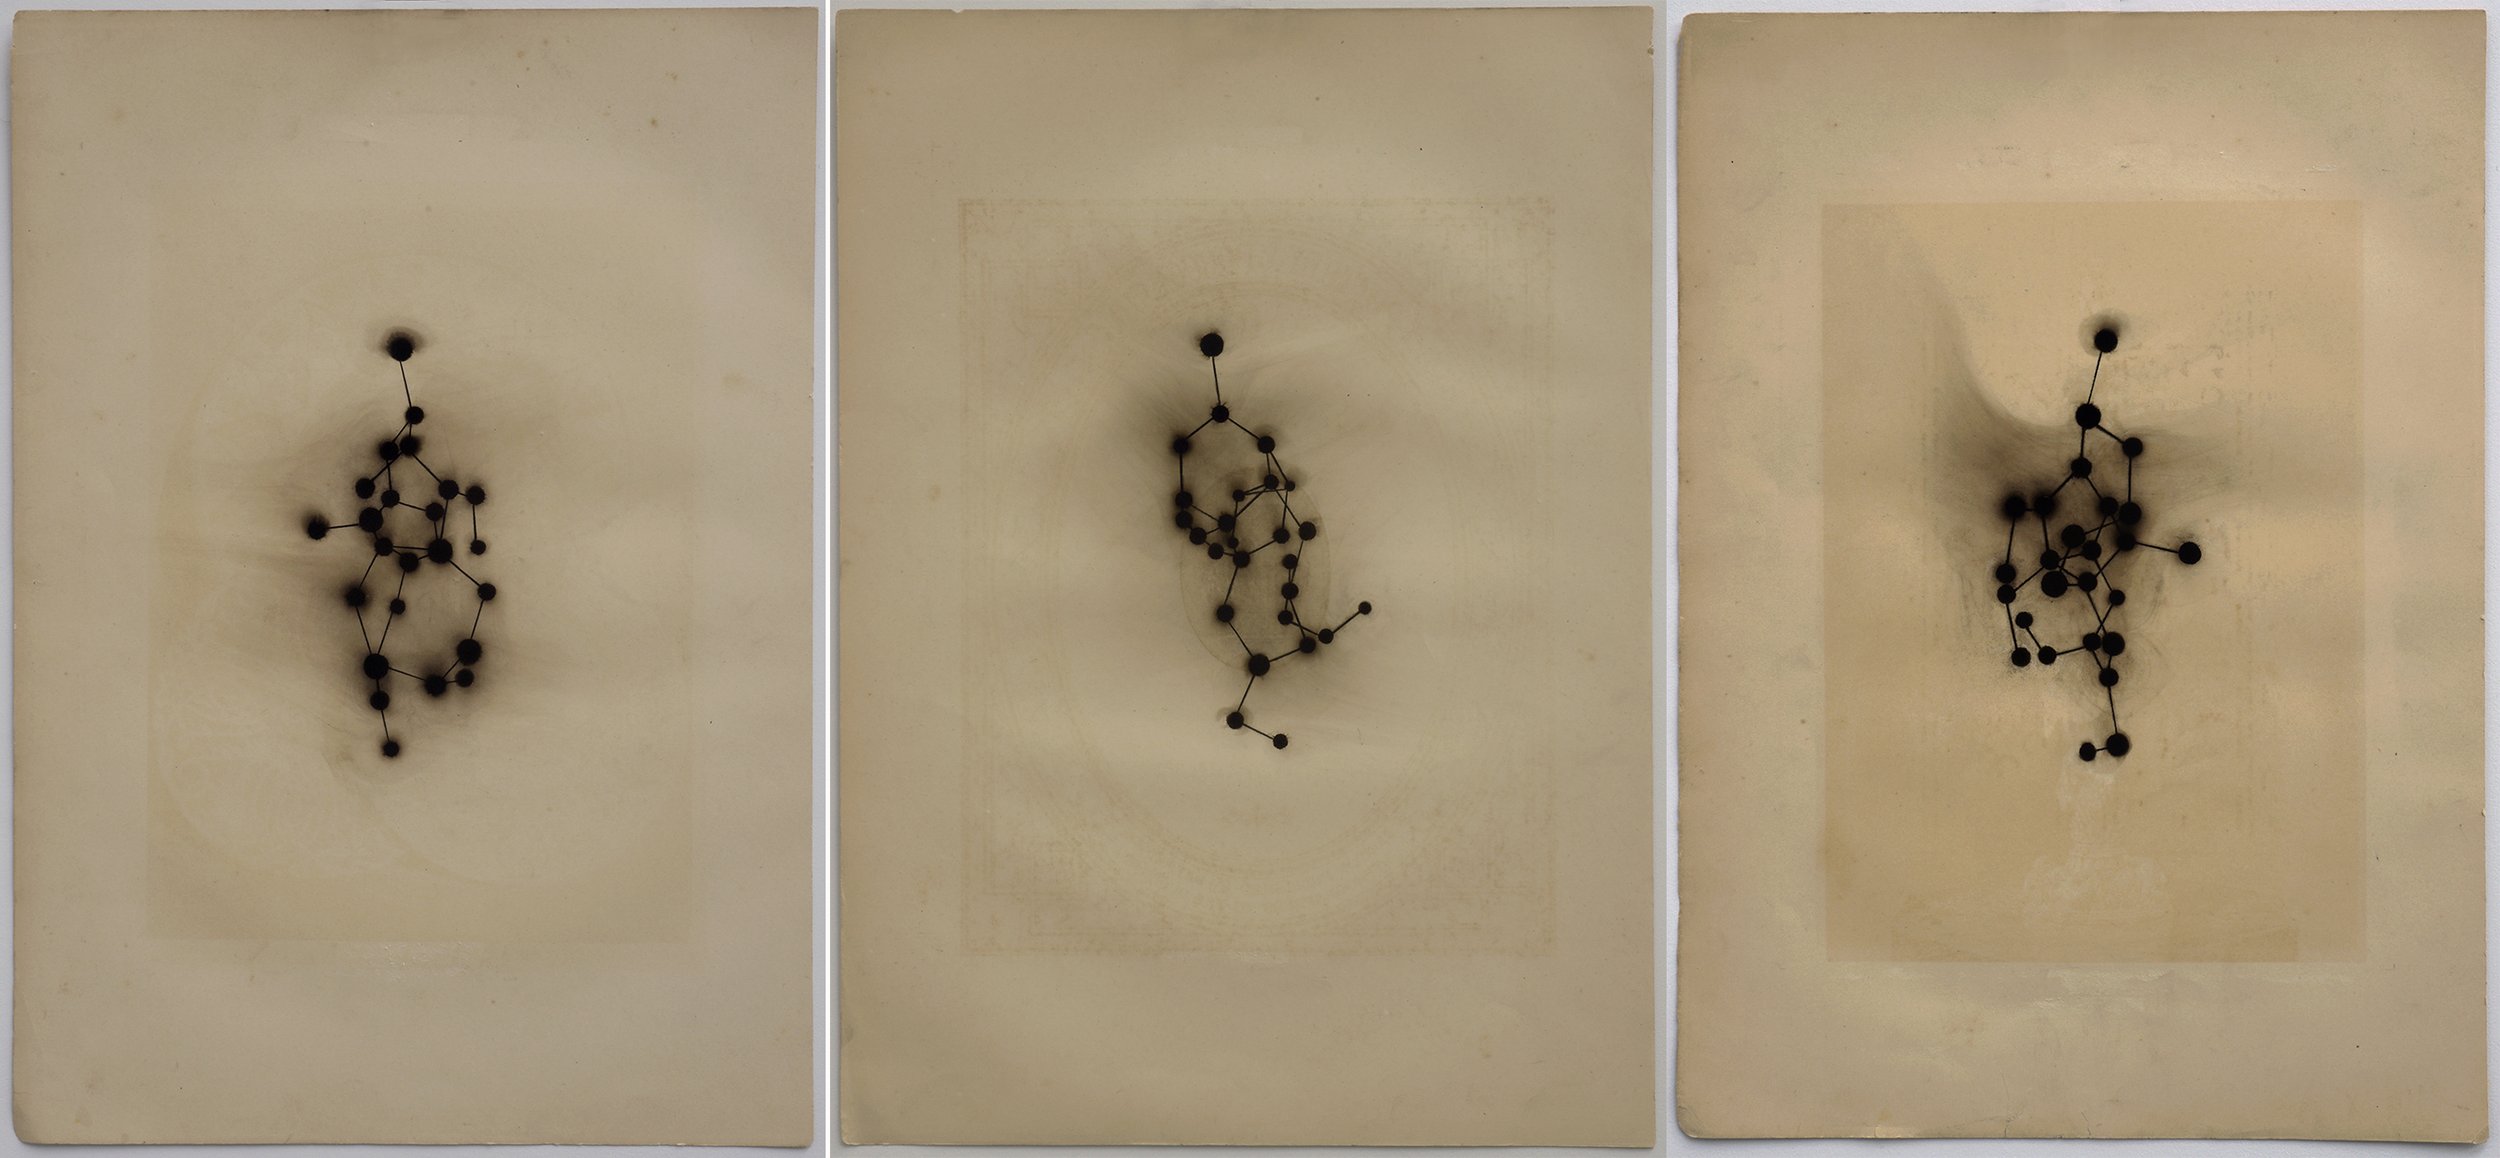   aerobic figures 7-9  2020 triptych; soot, discarded book plates 3@ 15.5 x 11.125 inches   